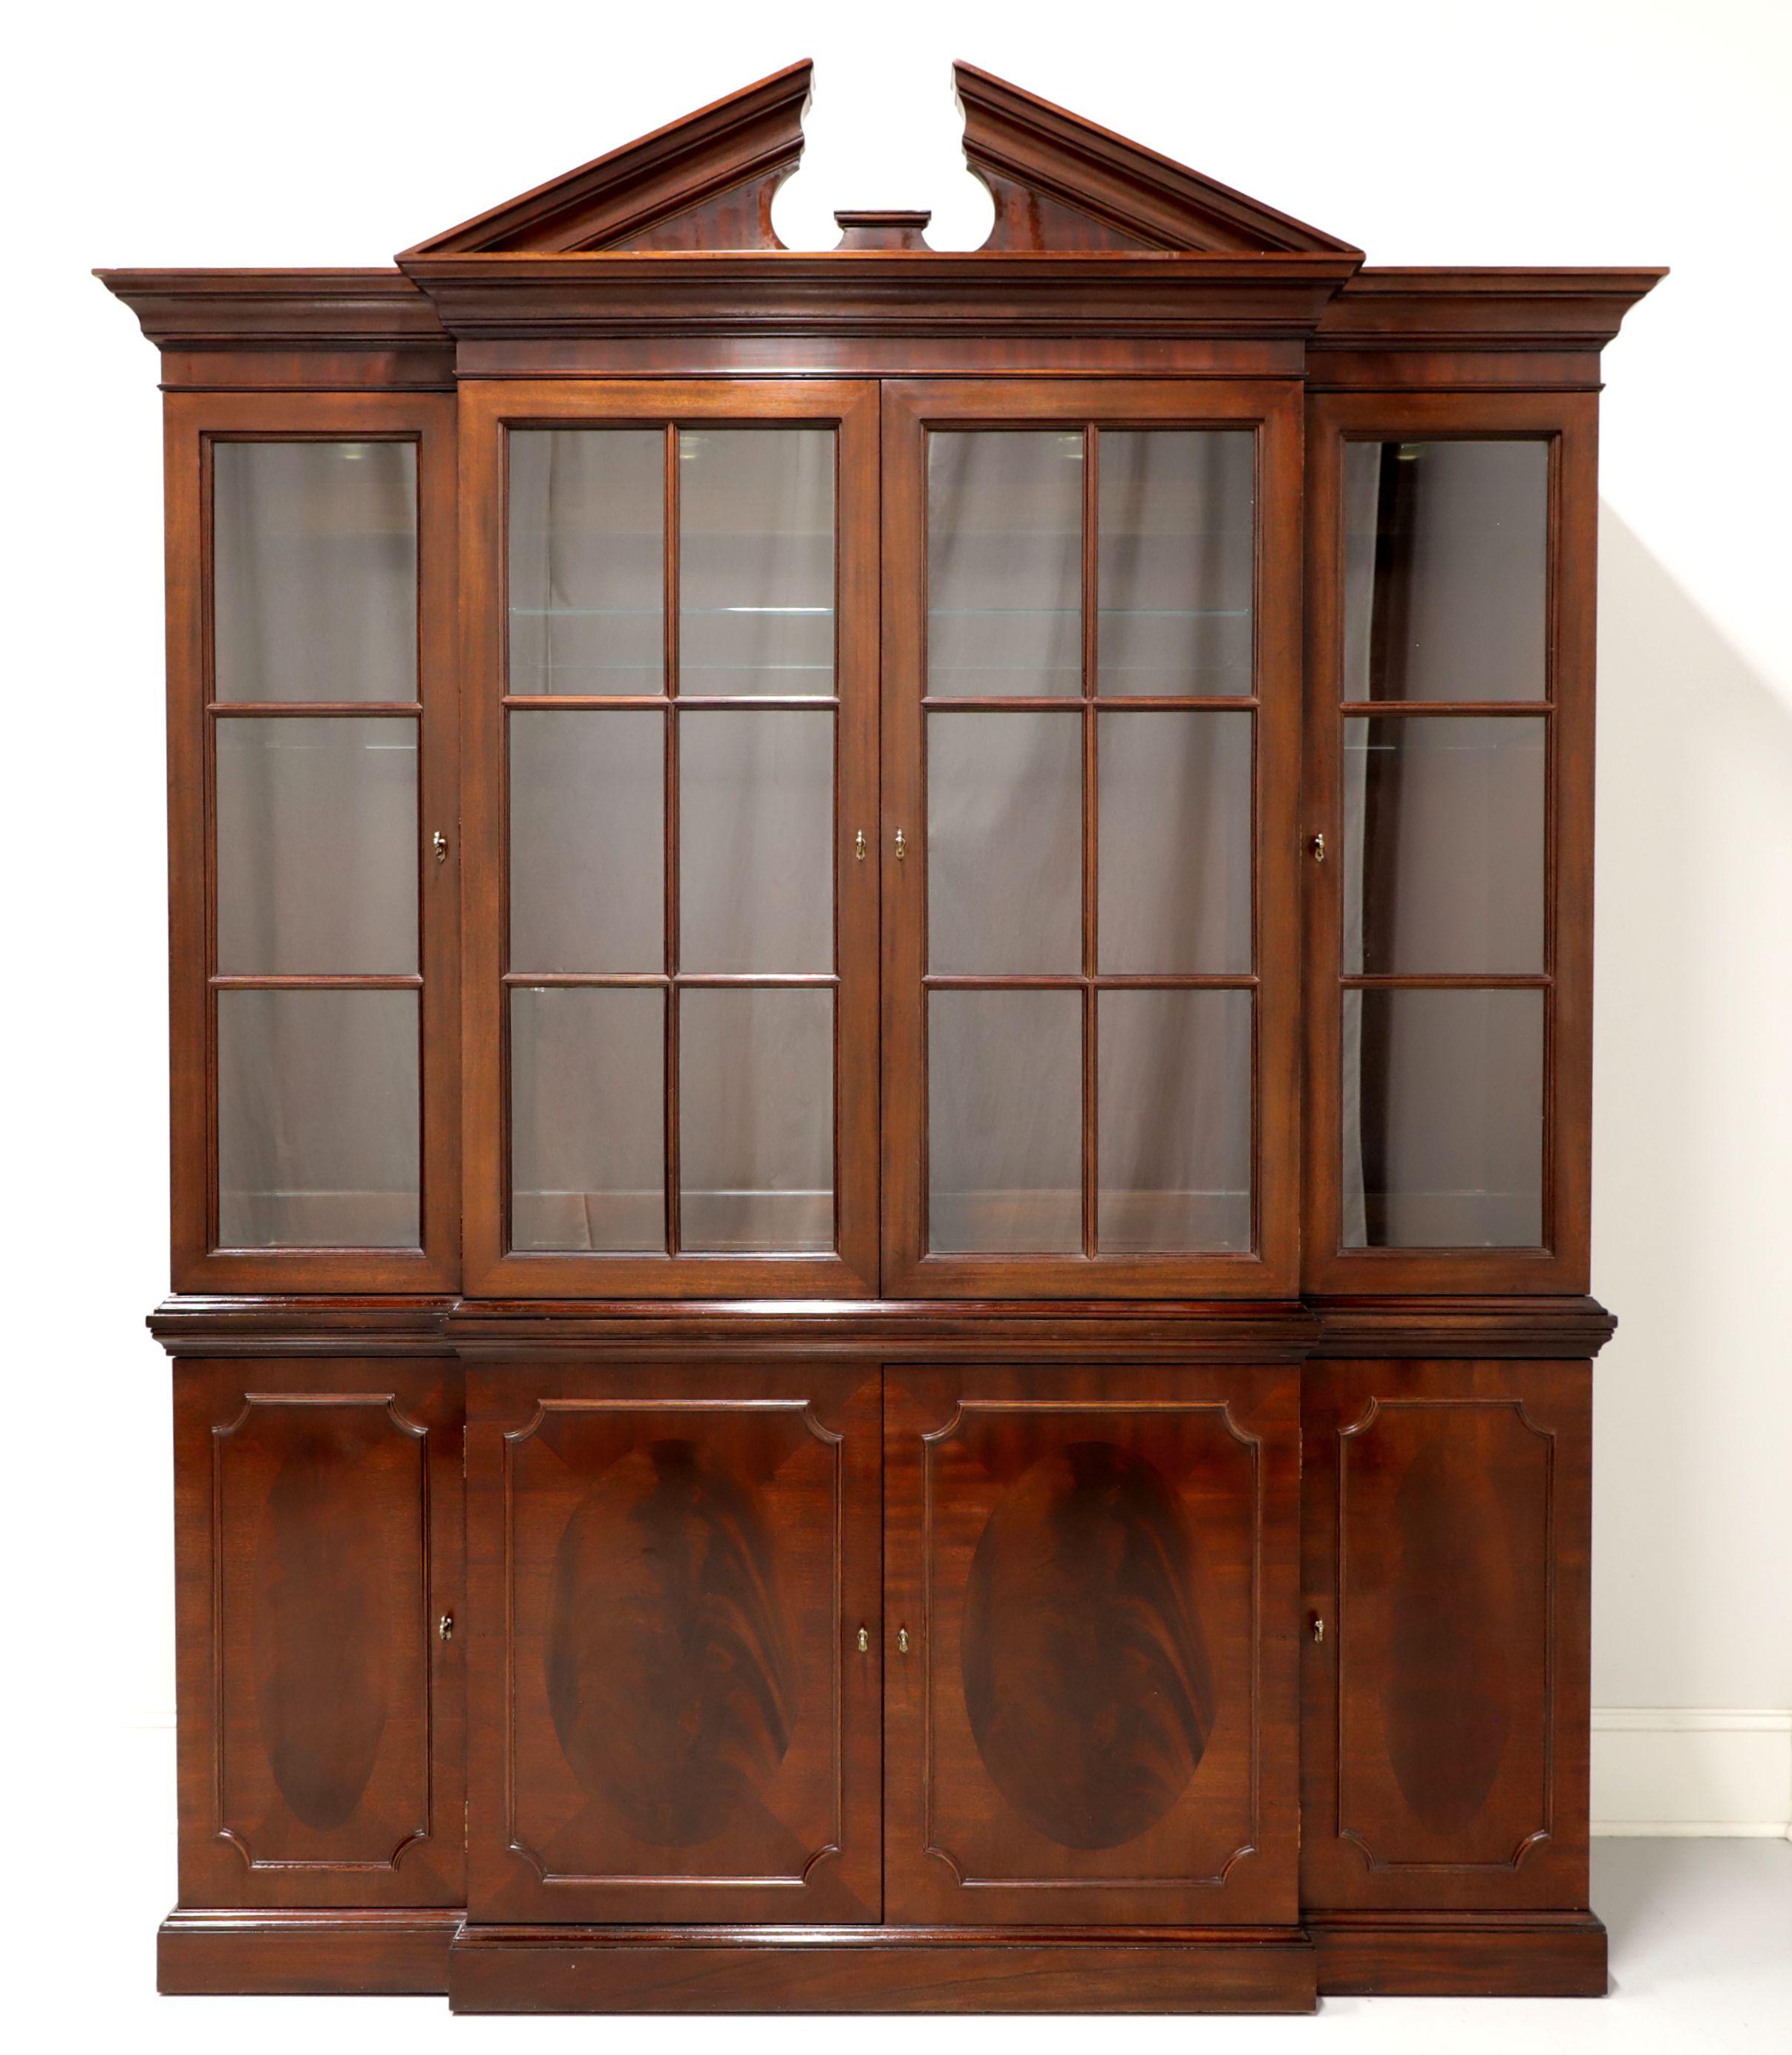 A Traditional style breakfront china cabinet by Baker Furniture. Mahogany with Inlaid flame mahogany, brass hardware, crown moulding with pediment to top and paned glass doors. Upper lighted cabinet features three separate compartments with two